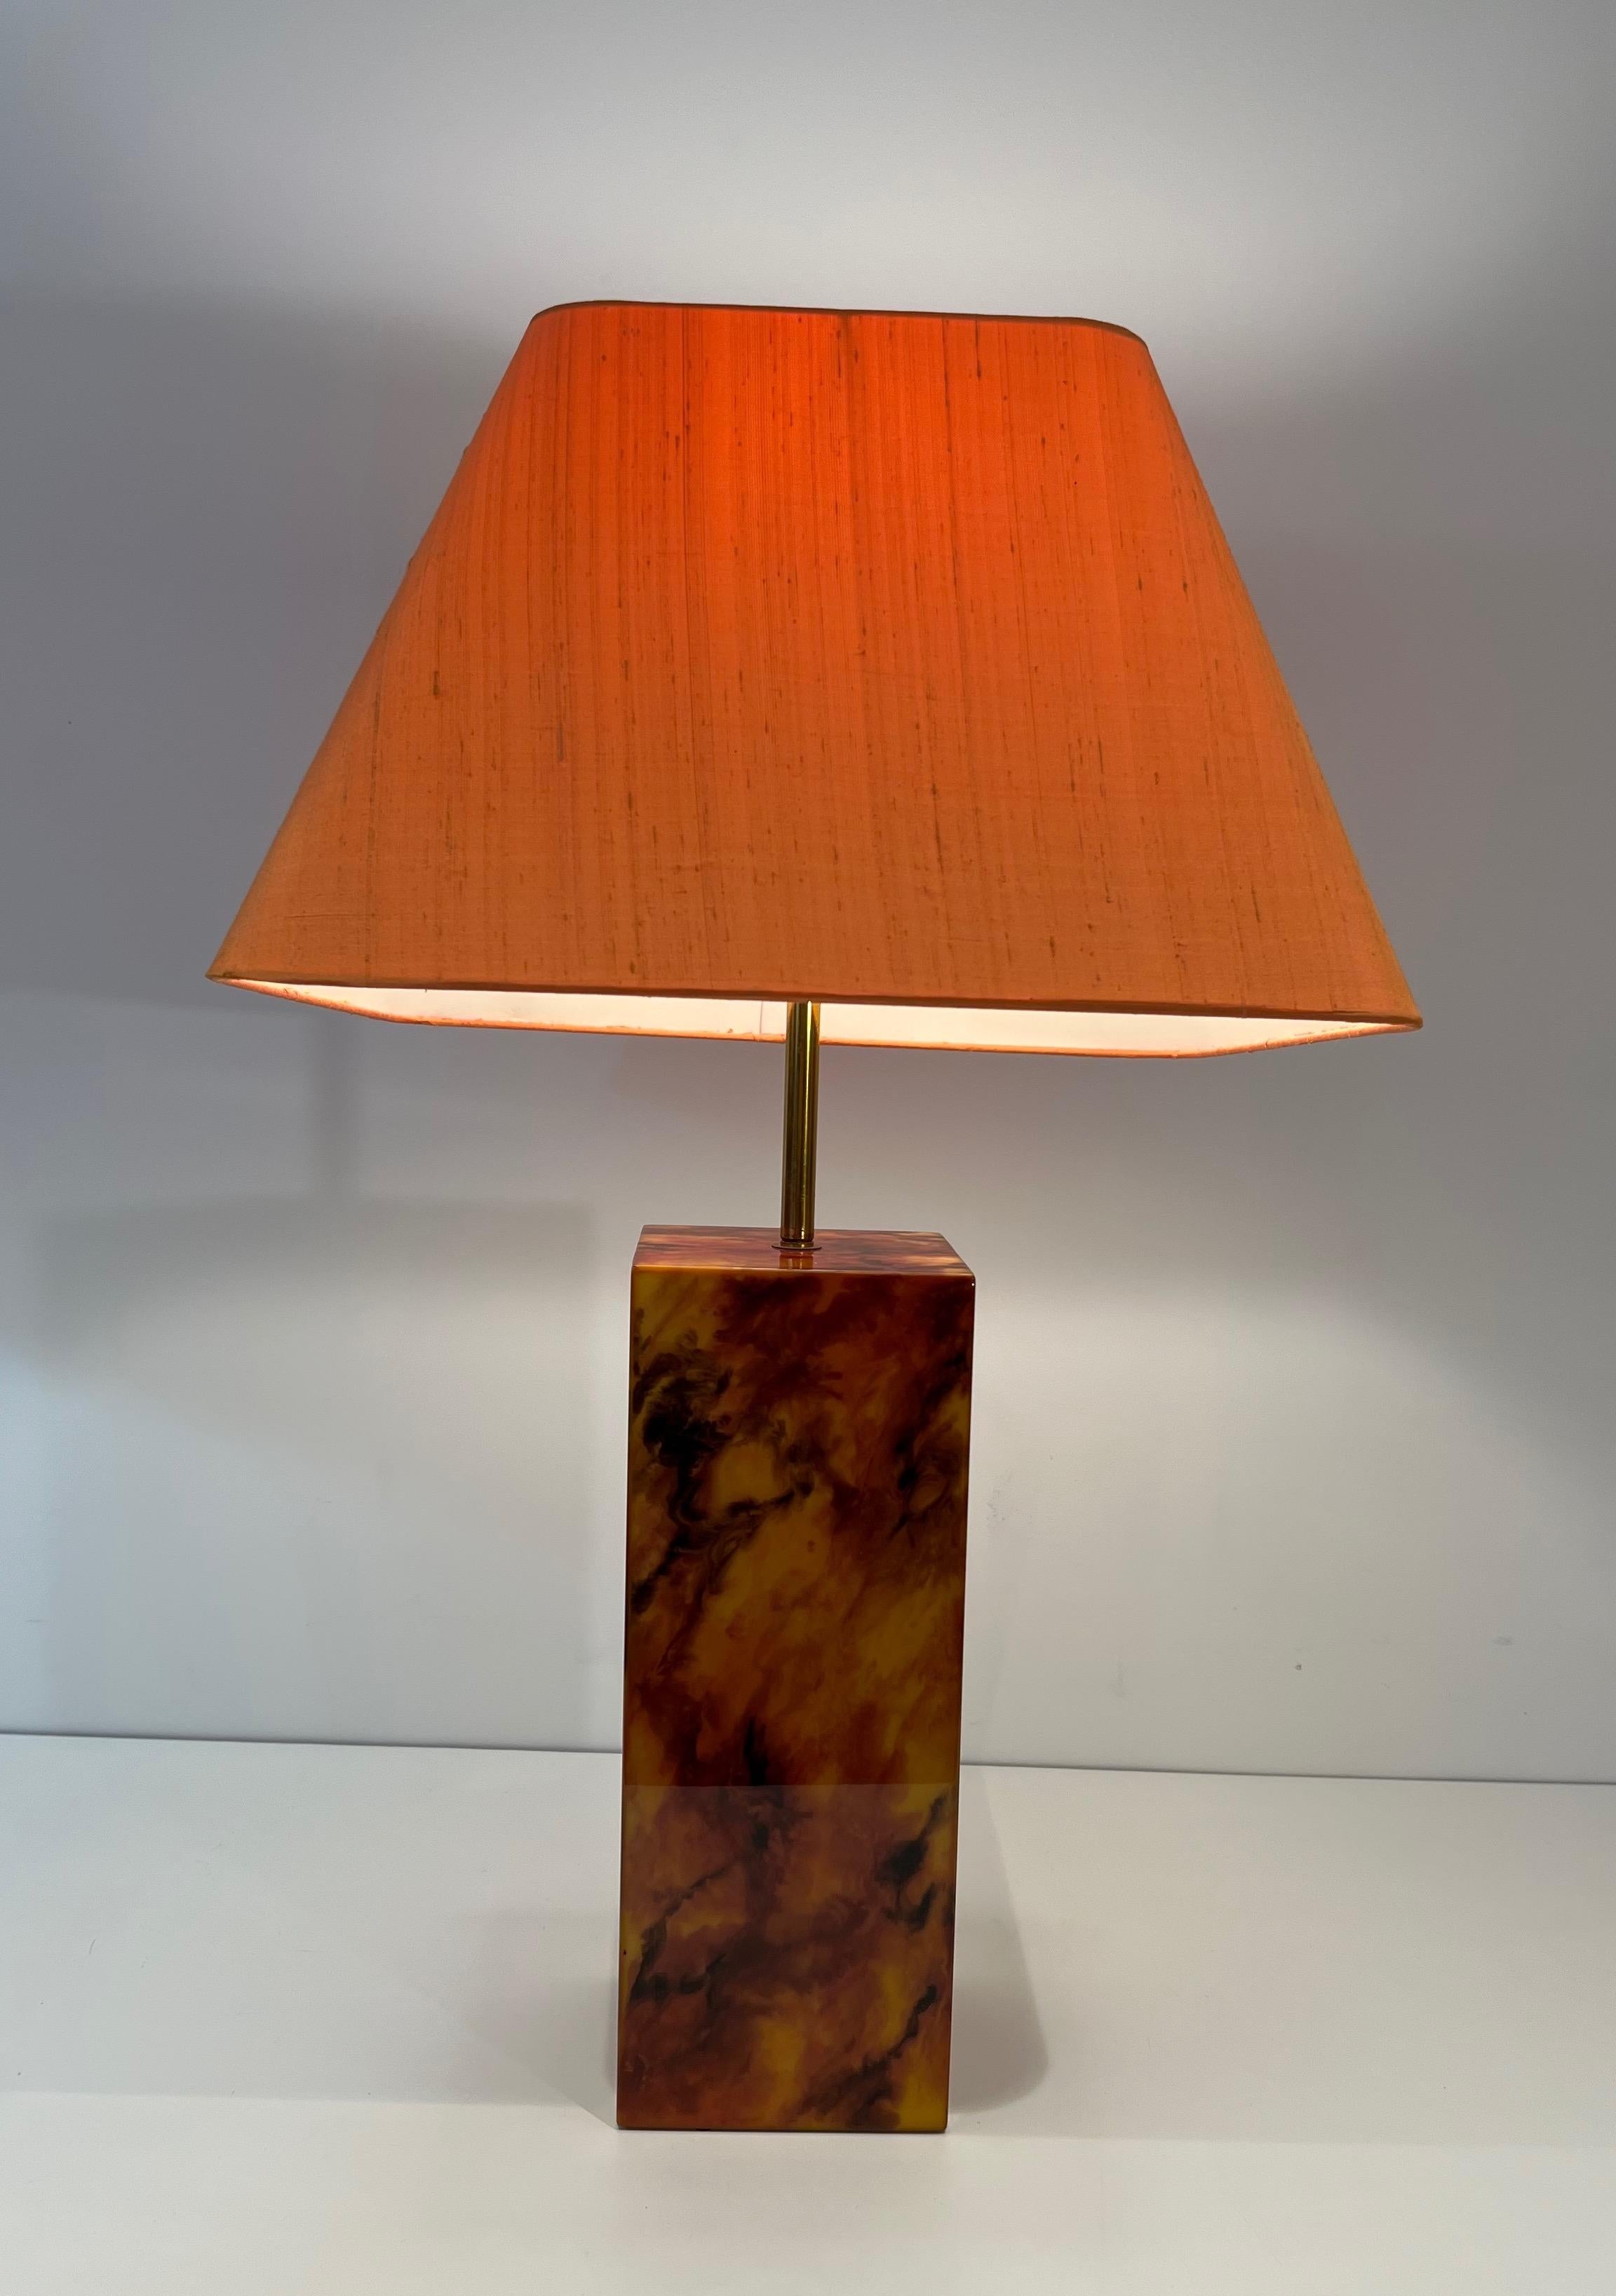 Pair of Lucite Lamps Imitating Tortoise Shell. French work. Circa 1970 For Sale 1